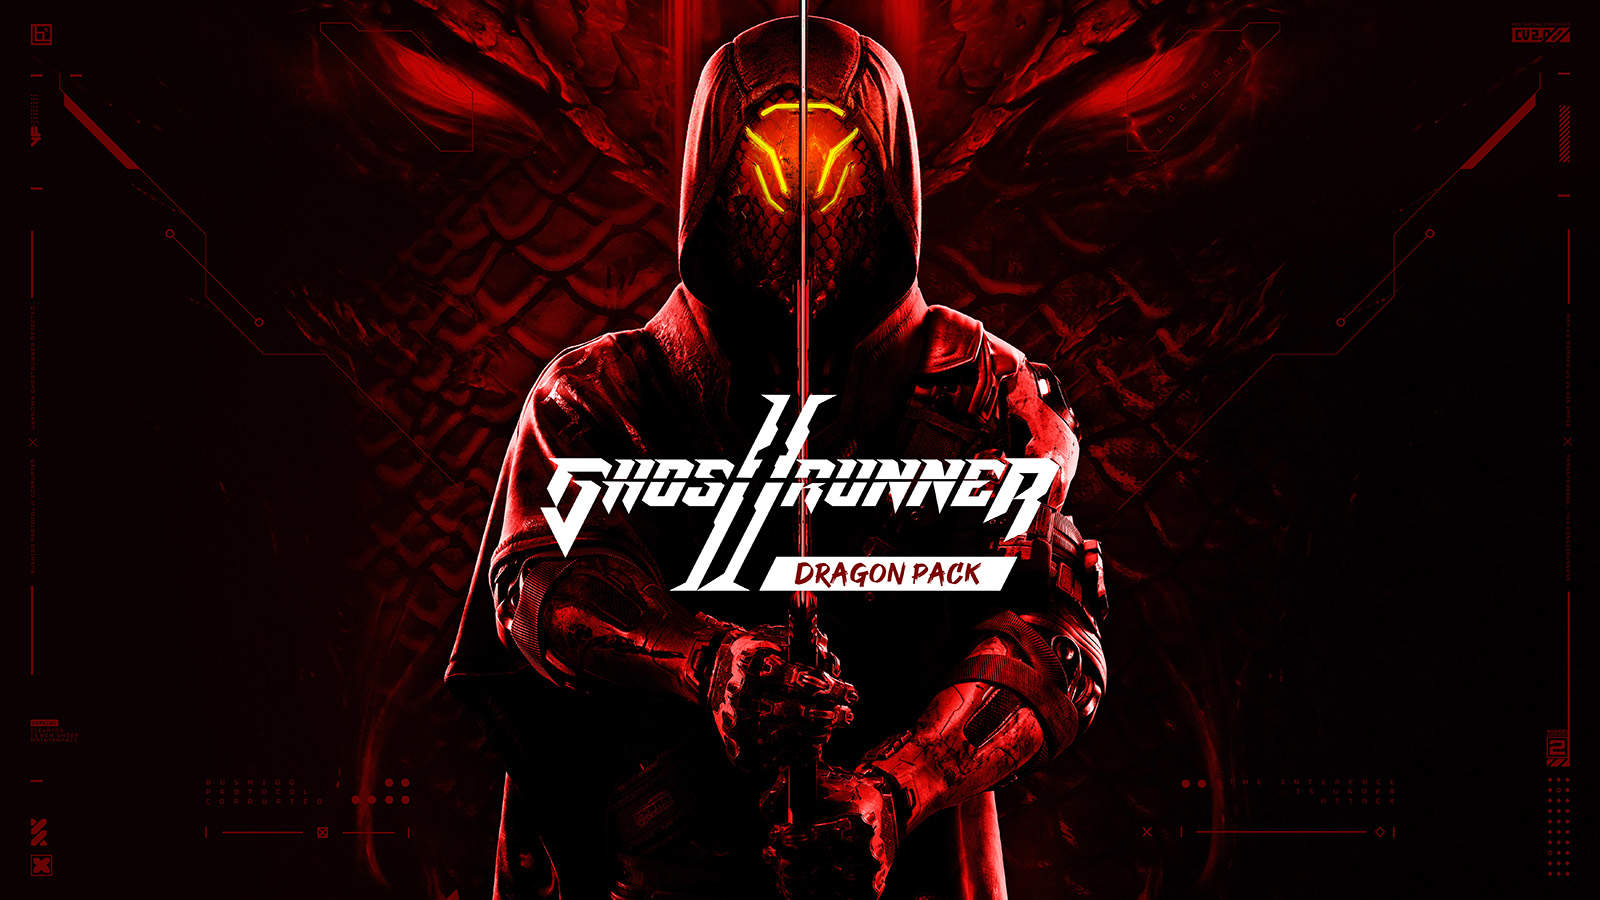 Ghostrunner 2 Celebrates The Year Of The Dragon With Dragon Pack Cosmetics And Updated Roguelike Mode